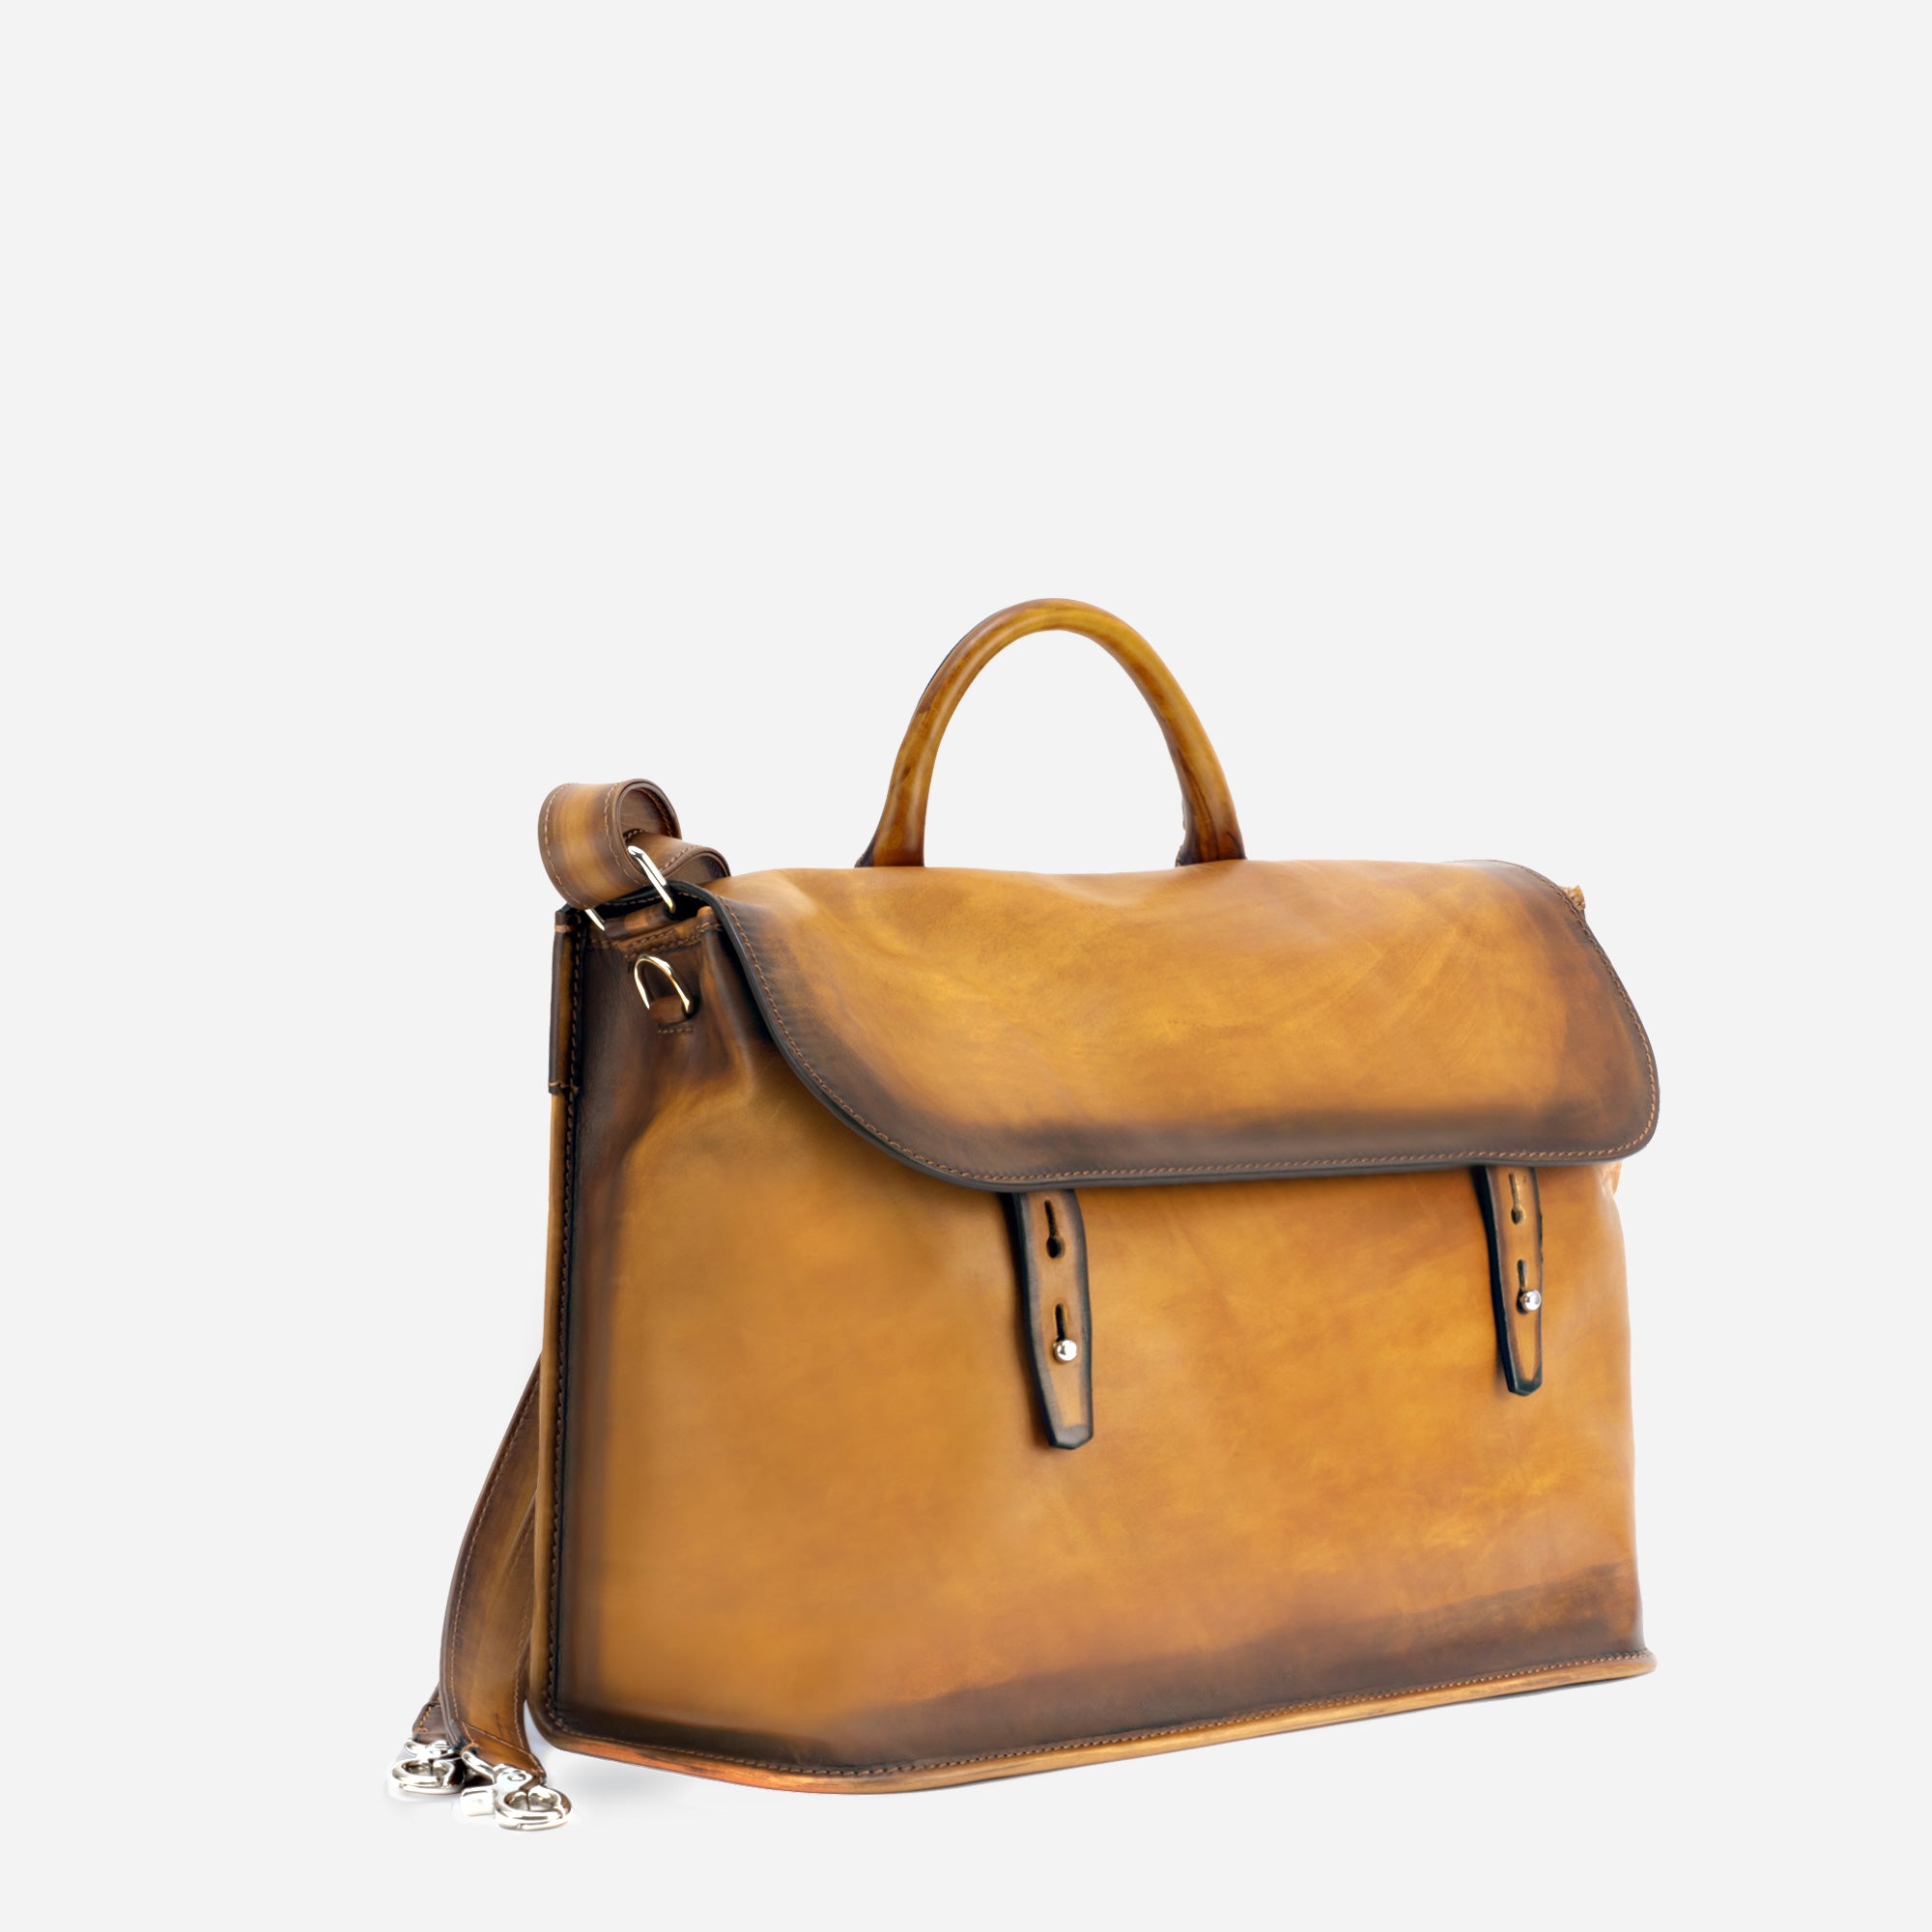 173M - Briefcase <br> Hand painted calfskin leather